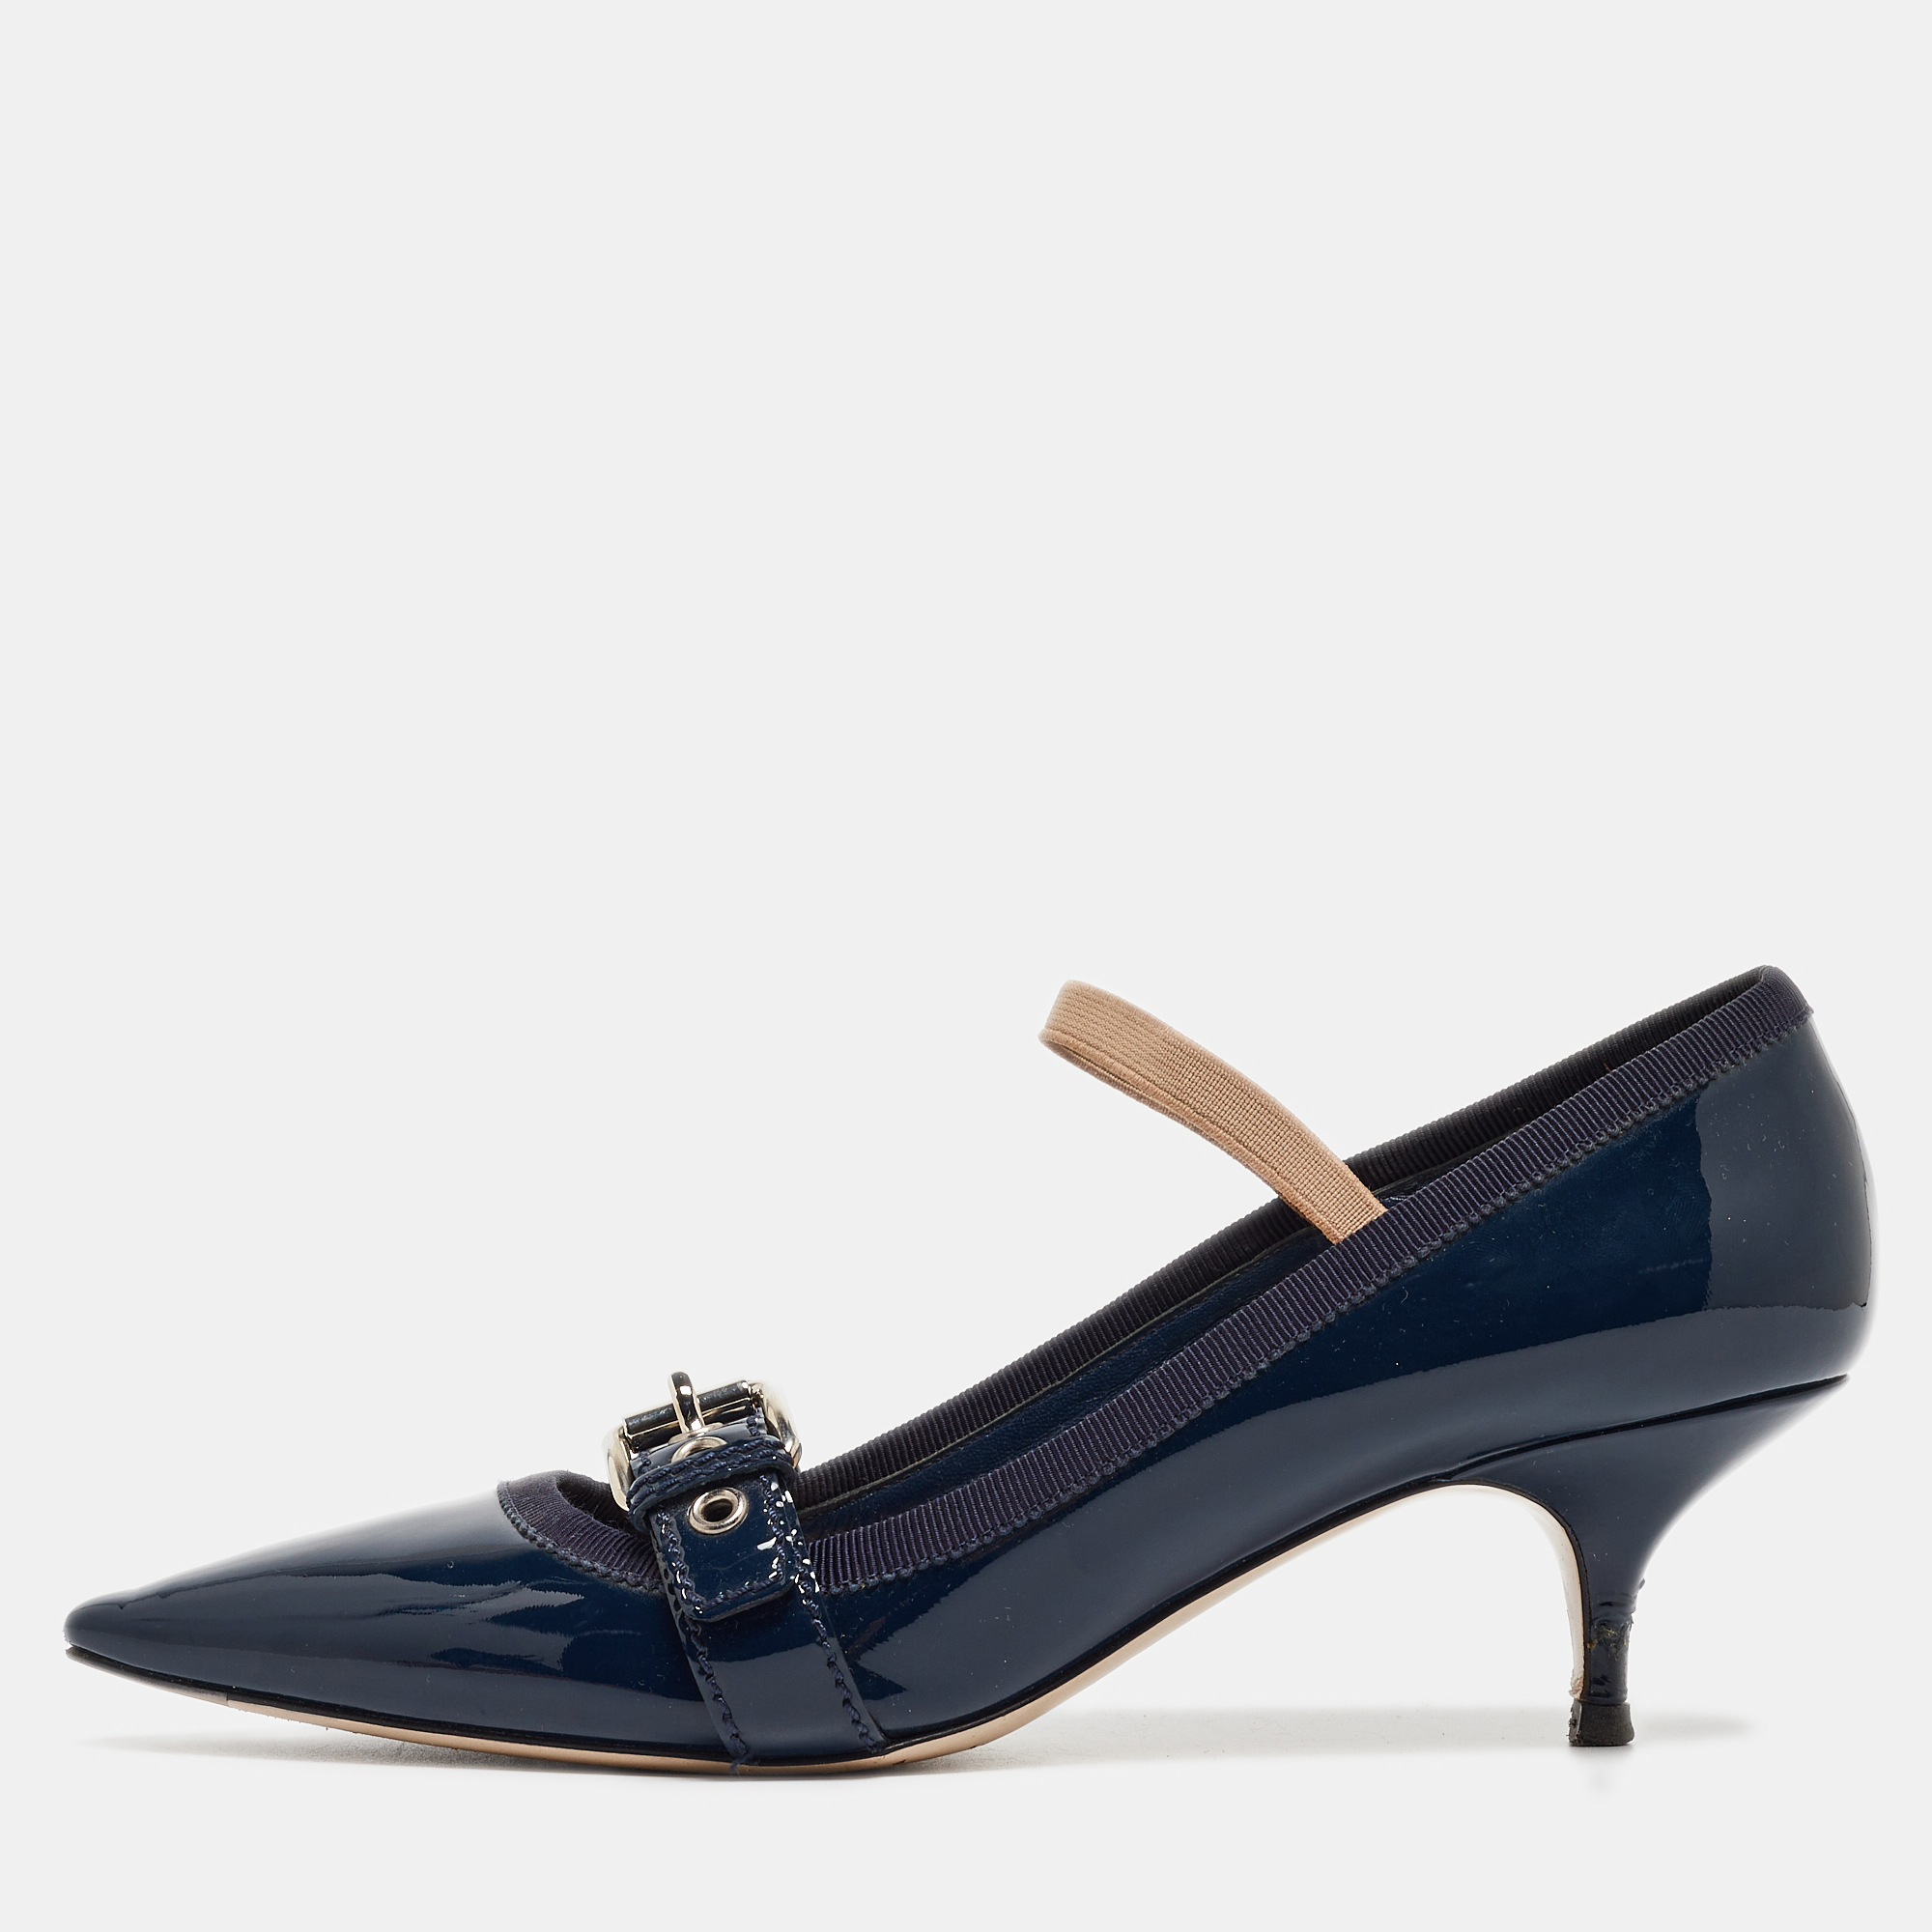 Pre-owned Miu Miu Navy Blue Patent Pointed Toe Buckle Pumps Size 38.5